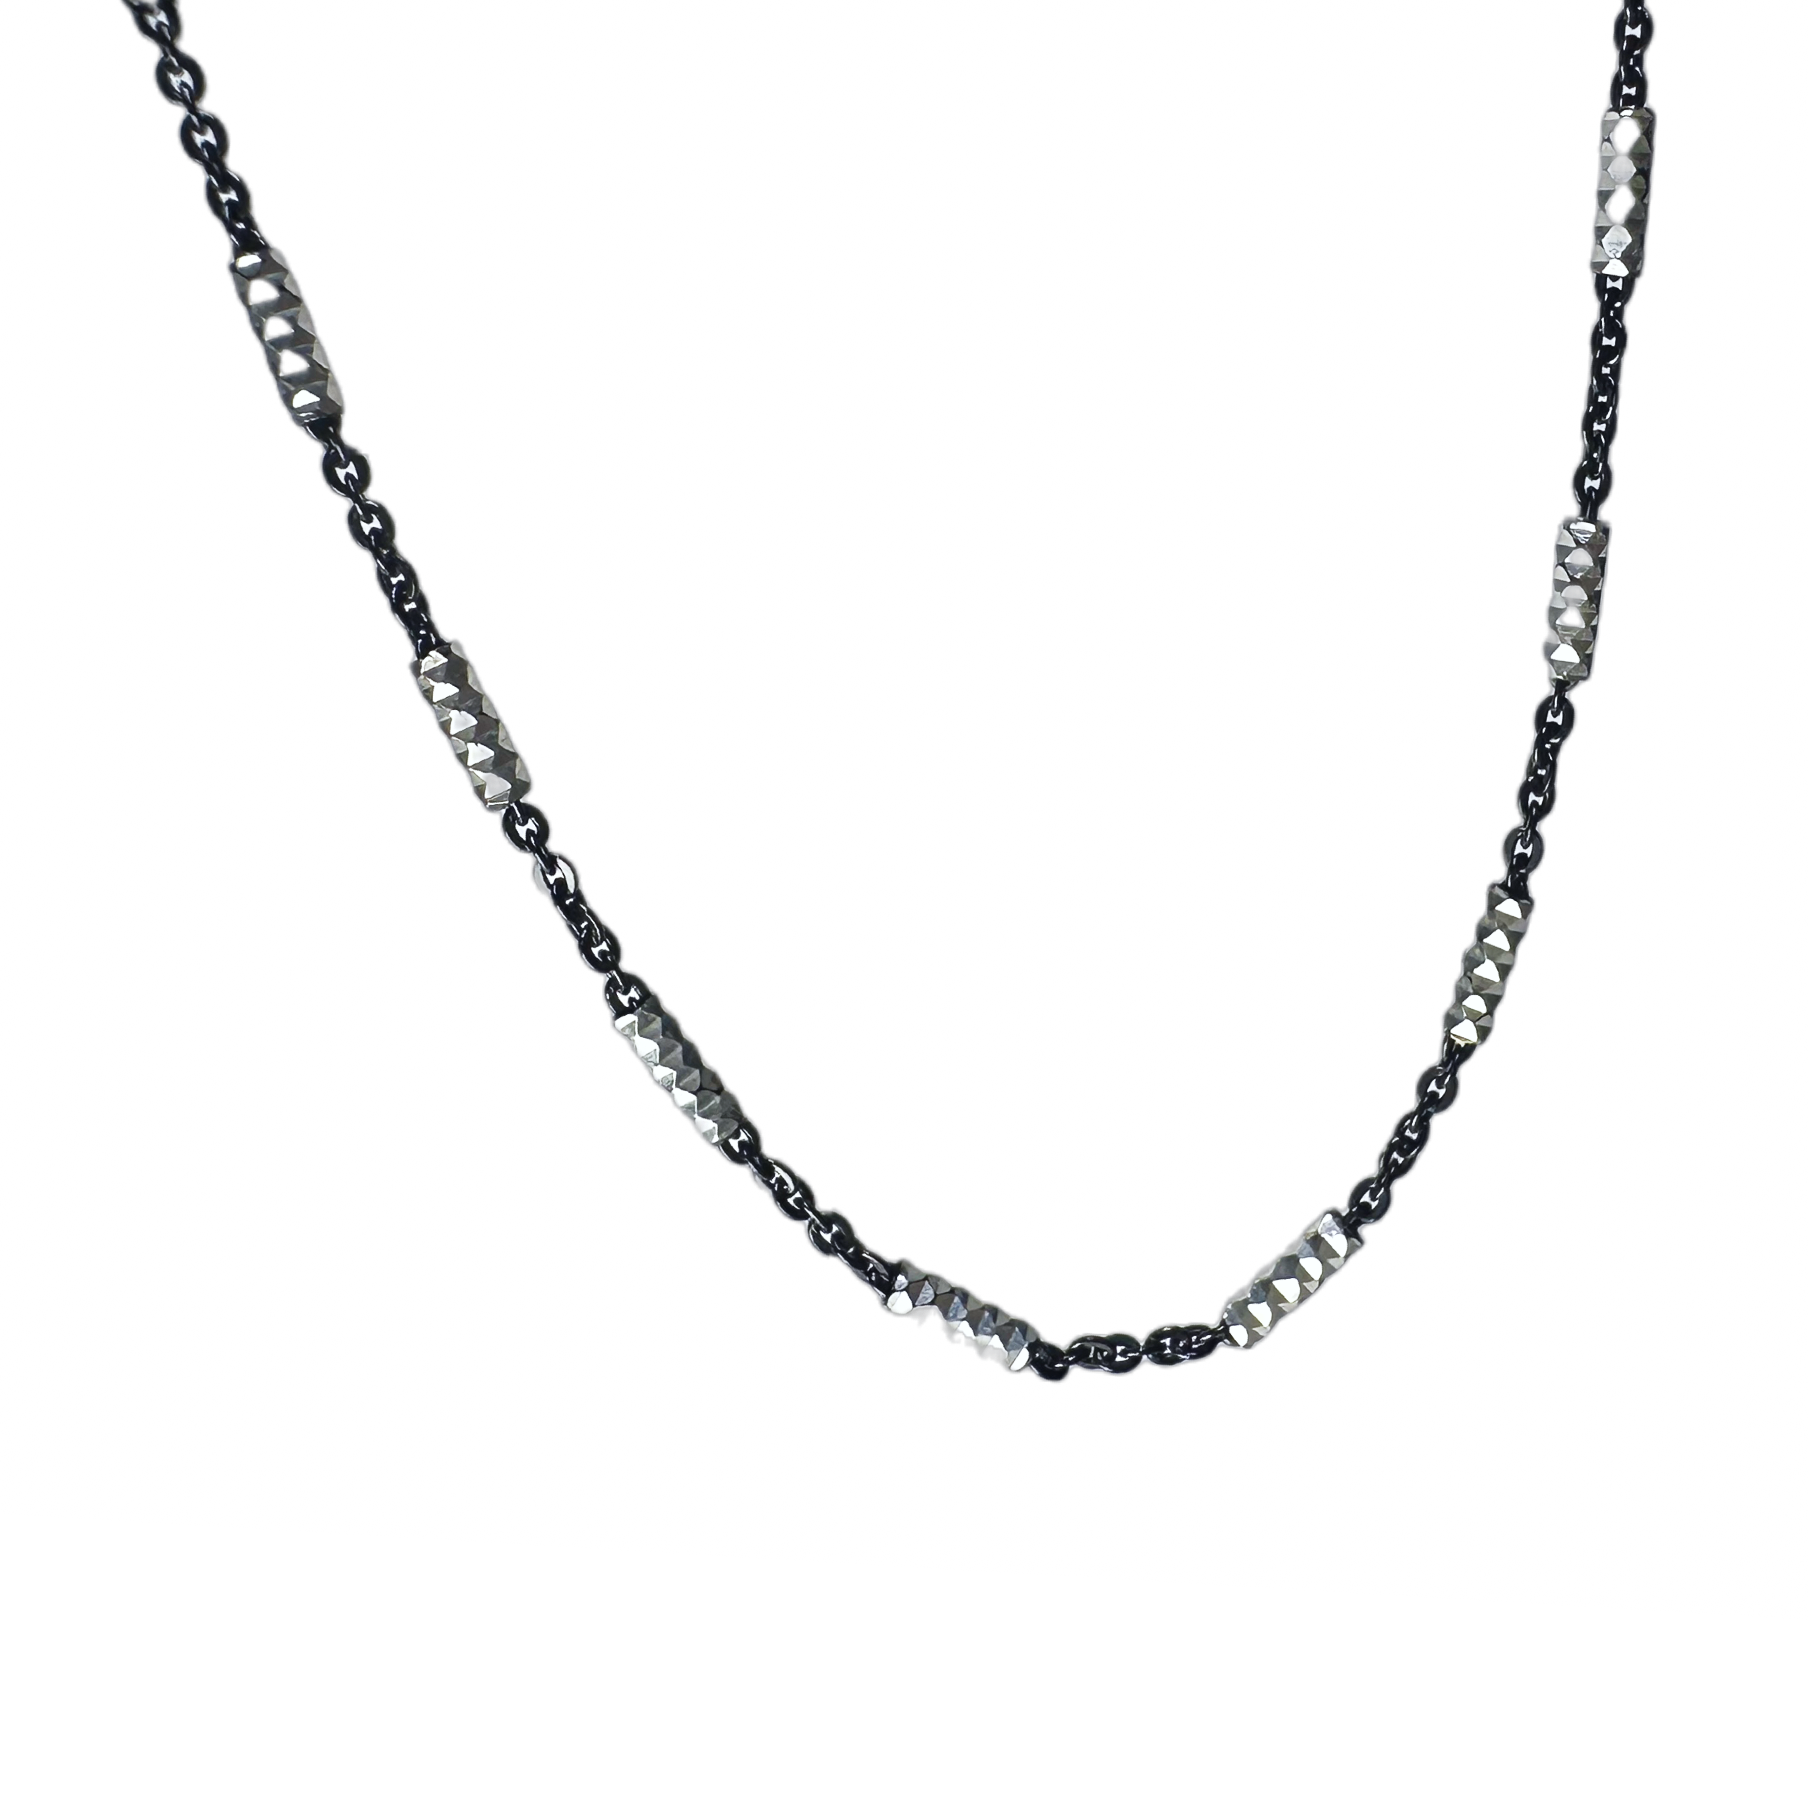 Two-Tone Sterling & Black Chain Necklace